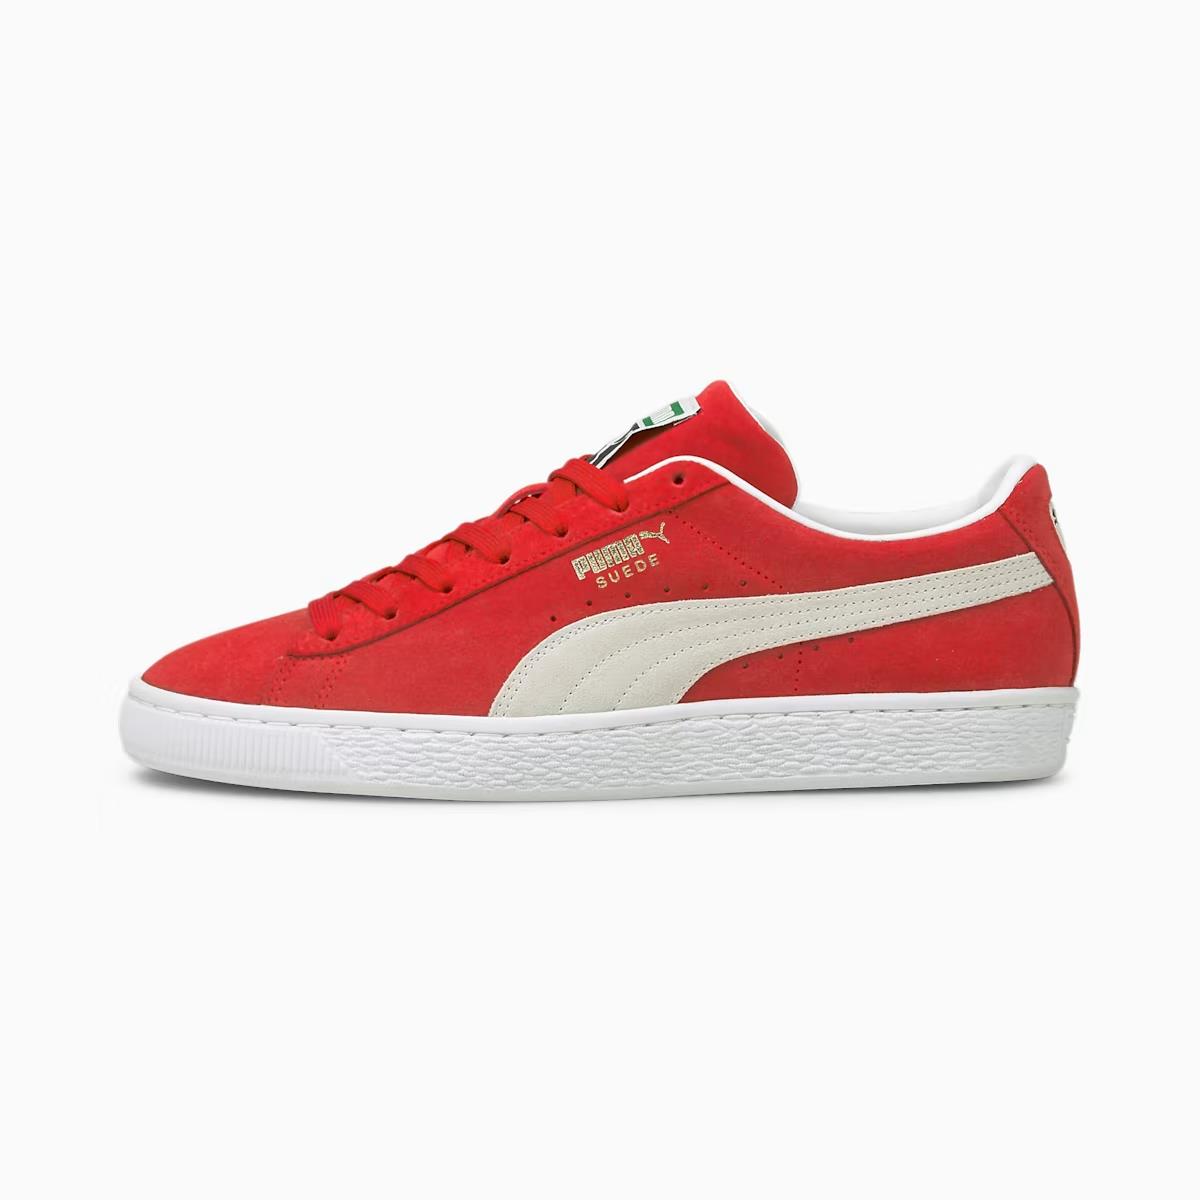 Puma Suede Classic Xxi 374915-02 Men`s Red/white Low Top Skate Shoes NR3047